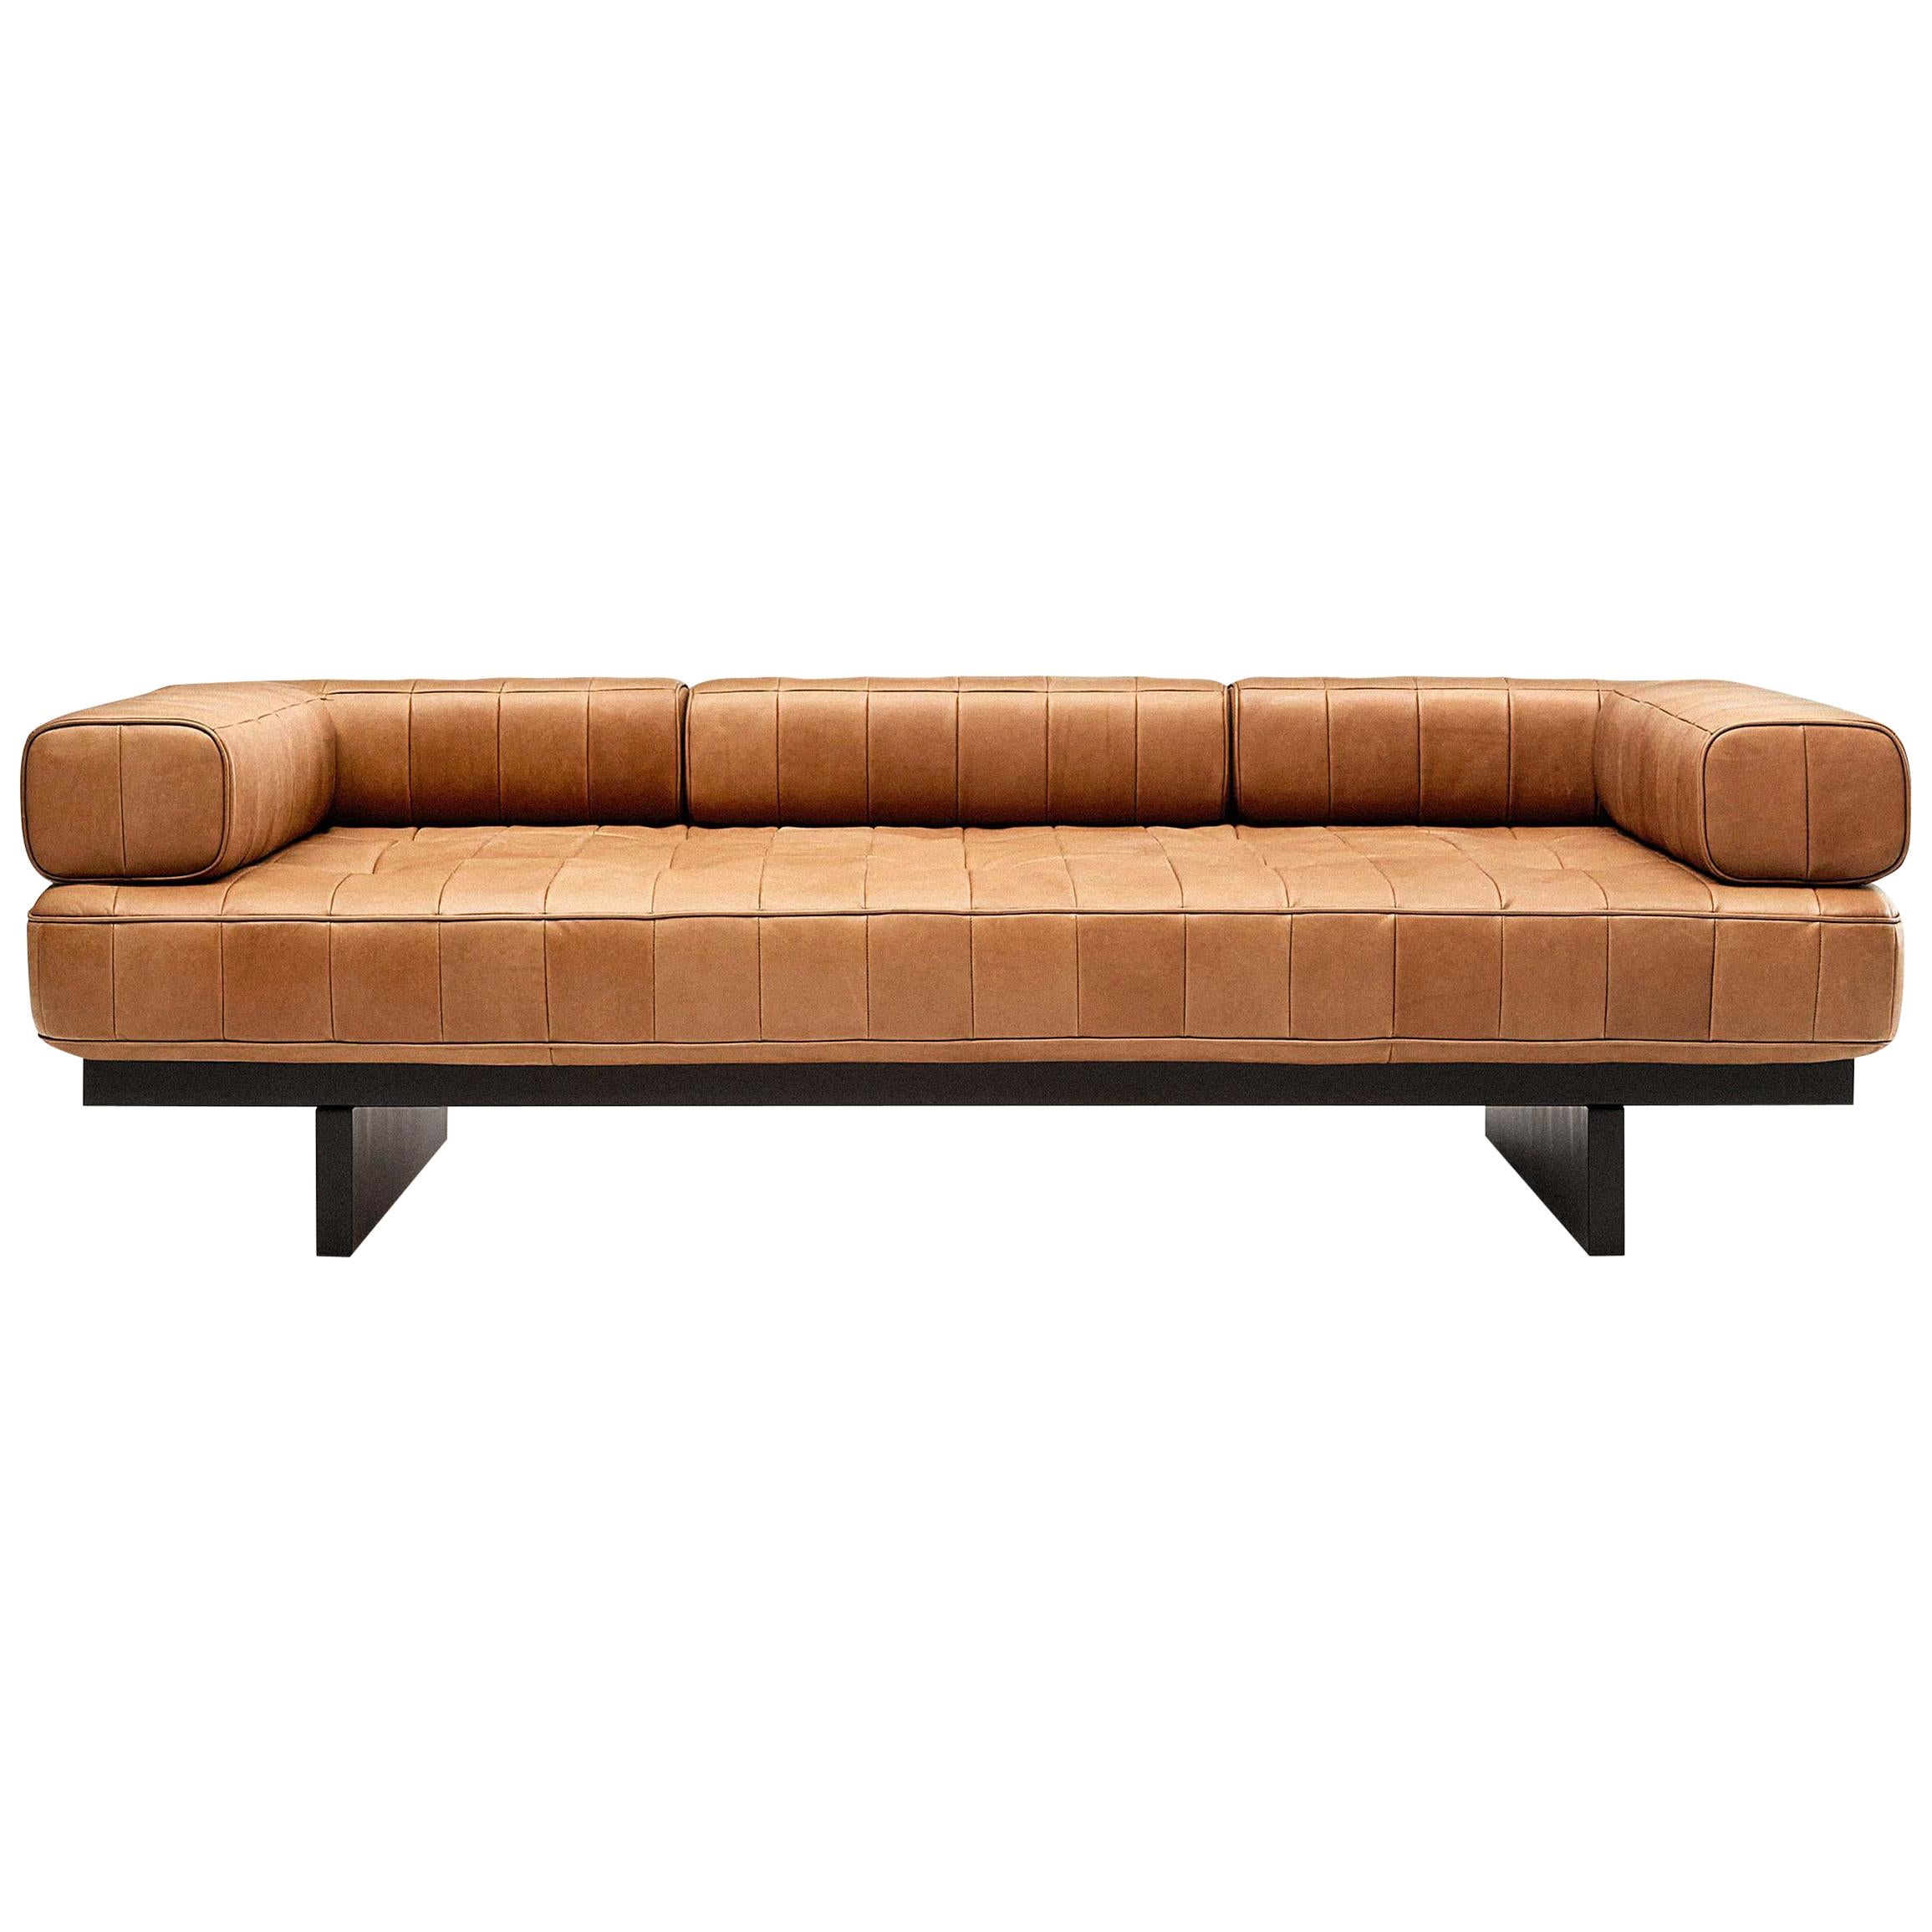 De Sede DS 80 Three-Seat Sofa in Nougat Upholstery by De Sede Design Team For Sale